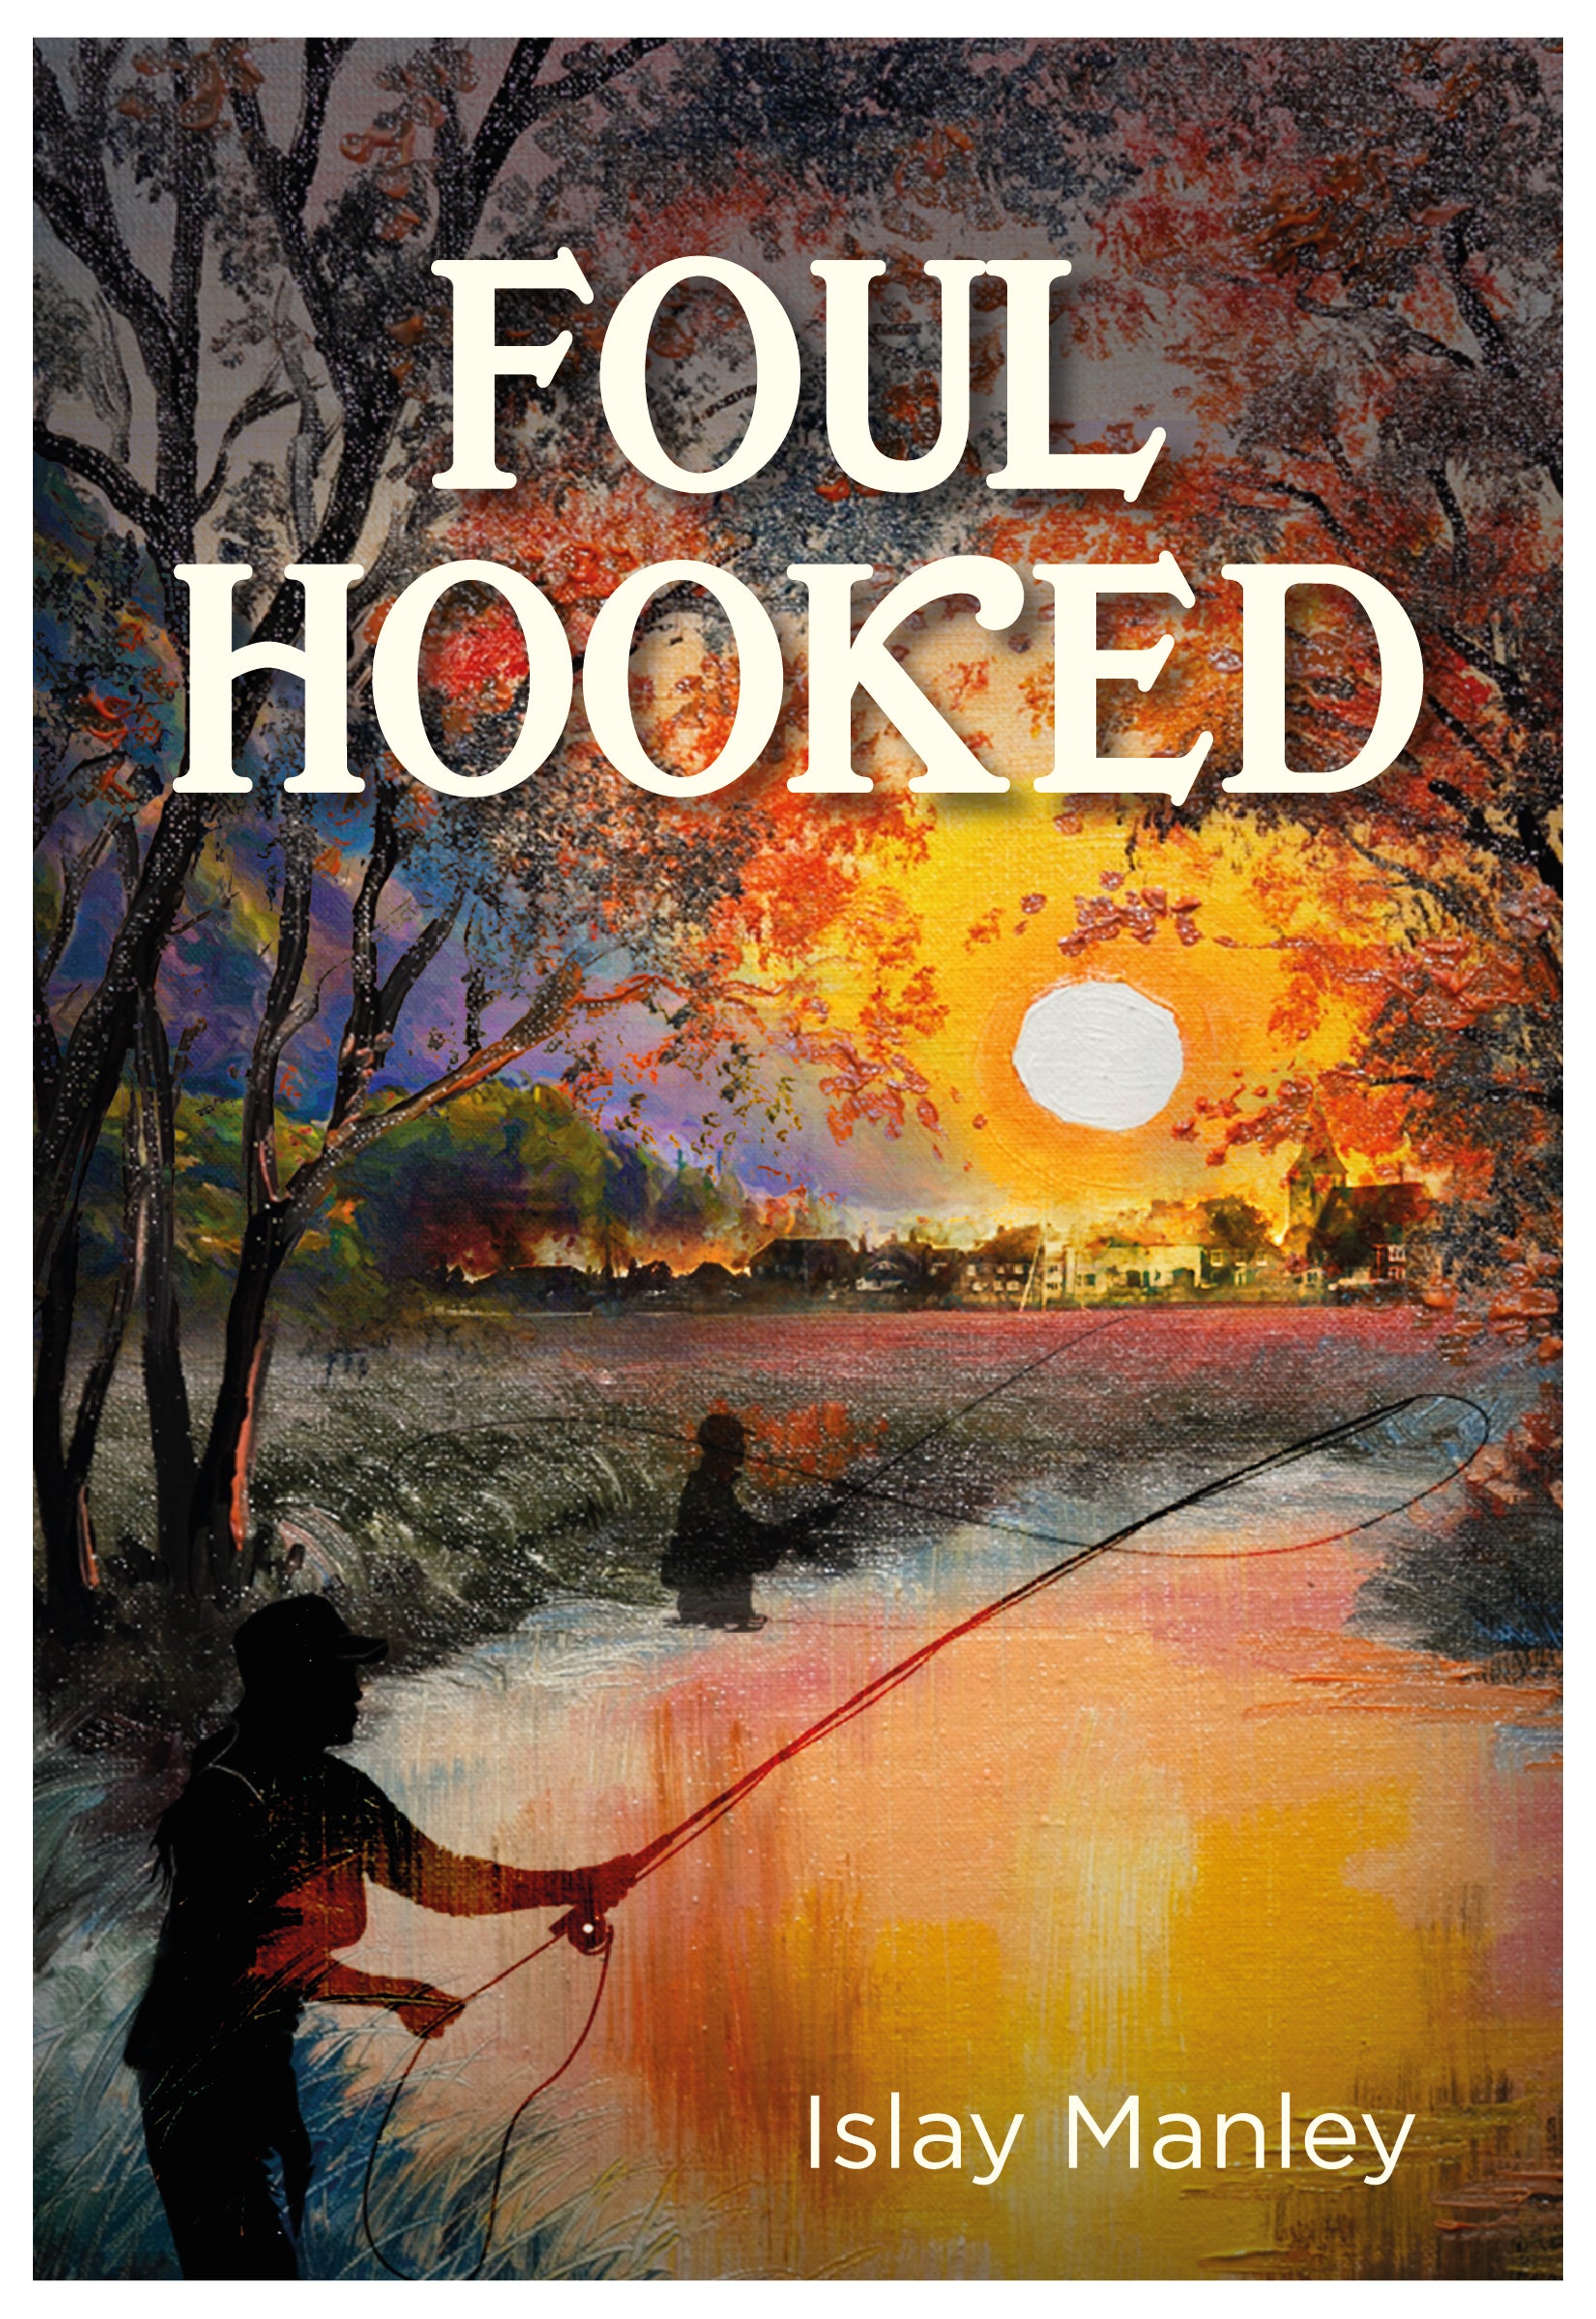 Foul Hooked - Islay Manley –